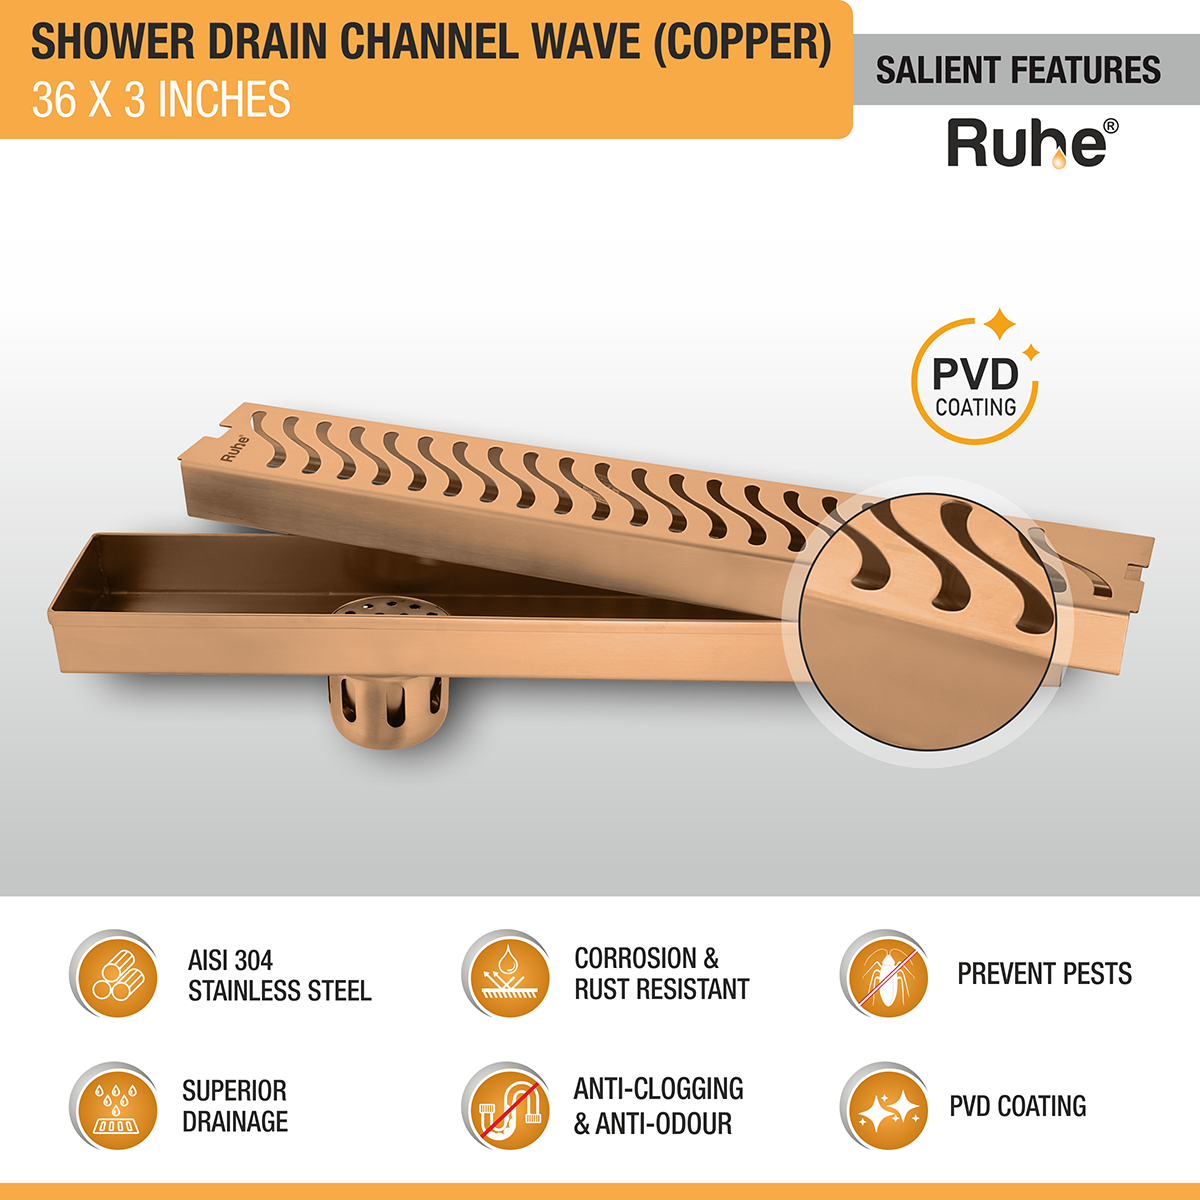 Wave Shower Drain Channel (36 x 3 Inches) ROSE GOLD/ANTIQUE COPPER features